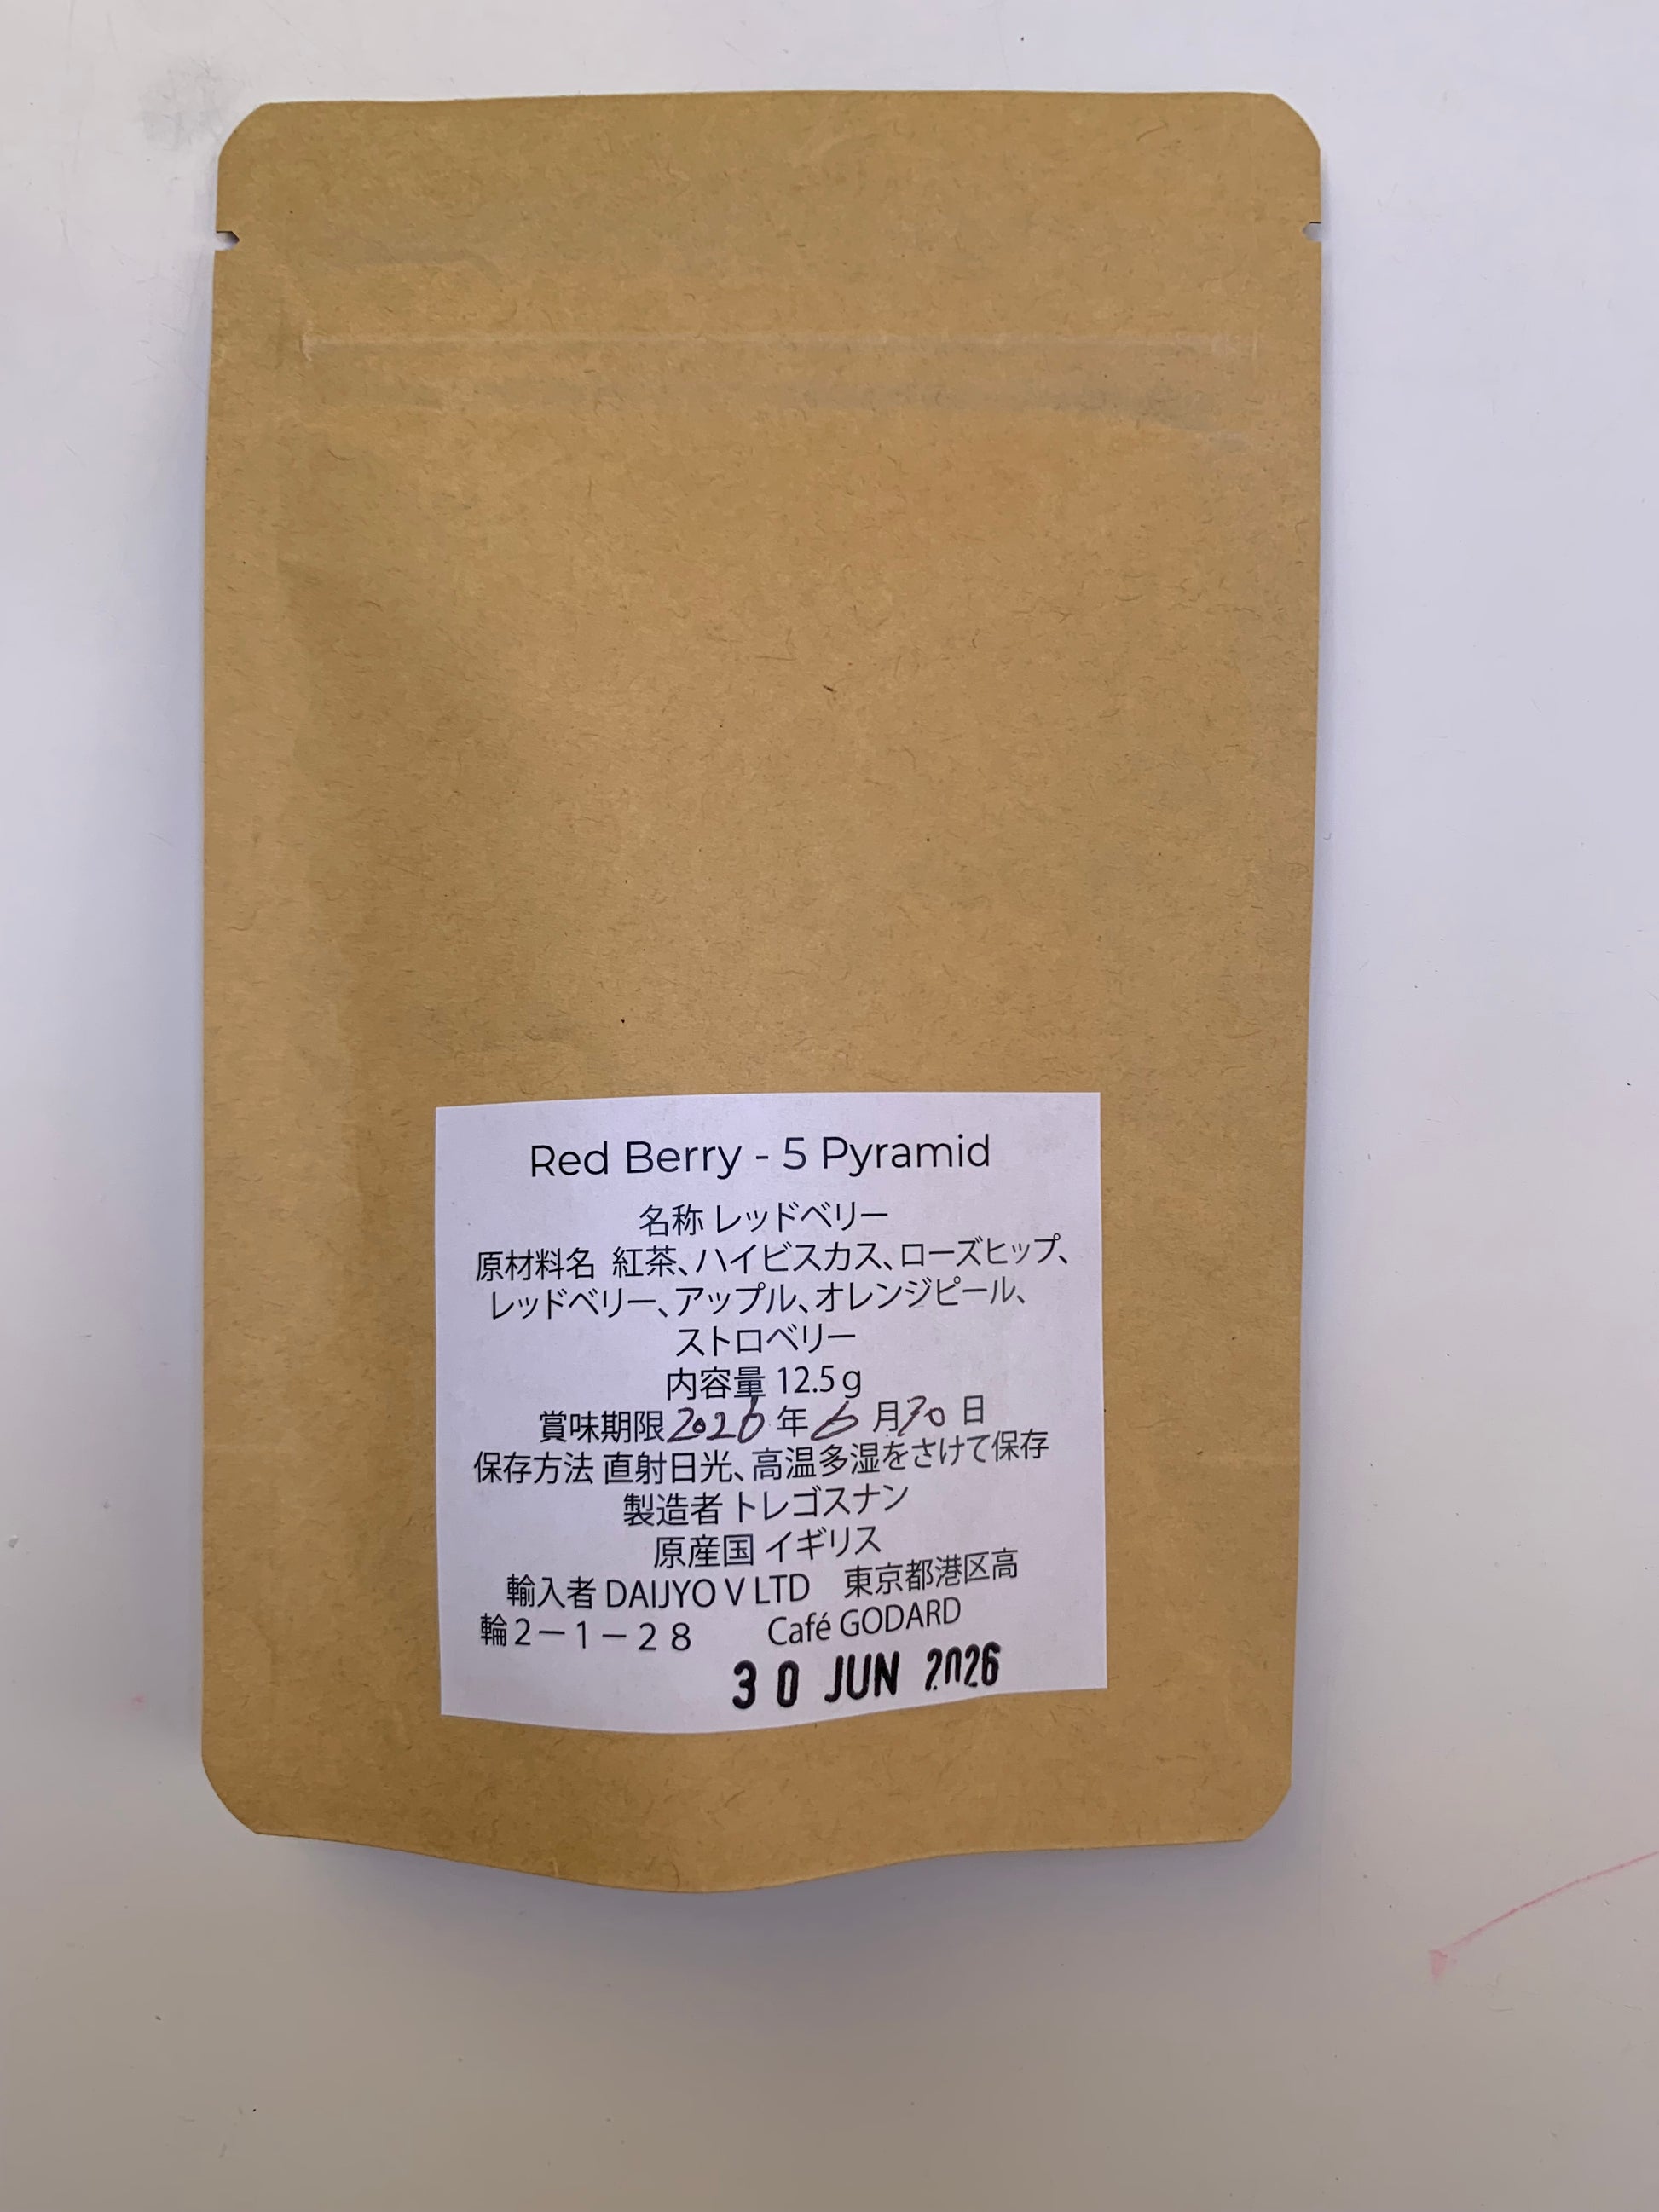 back view of pouch with Japanese ingredients label.